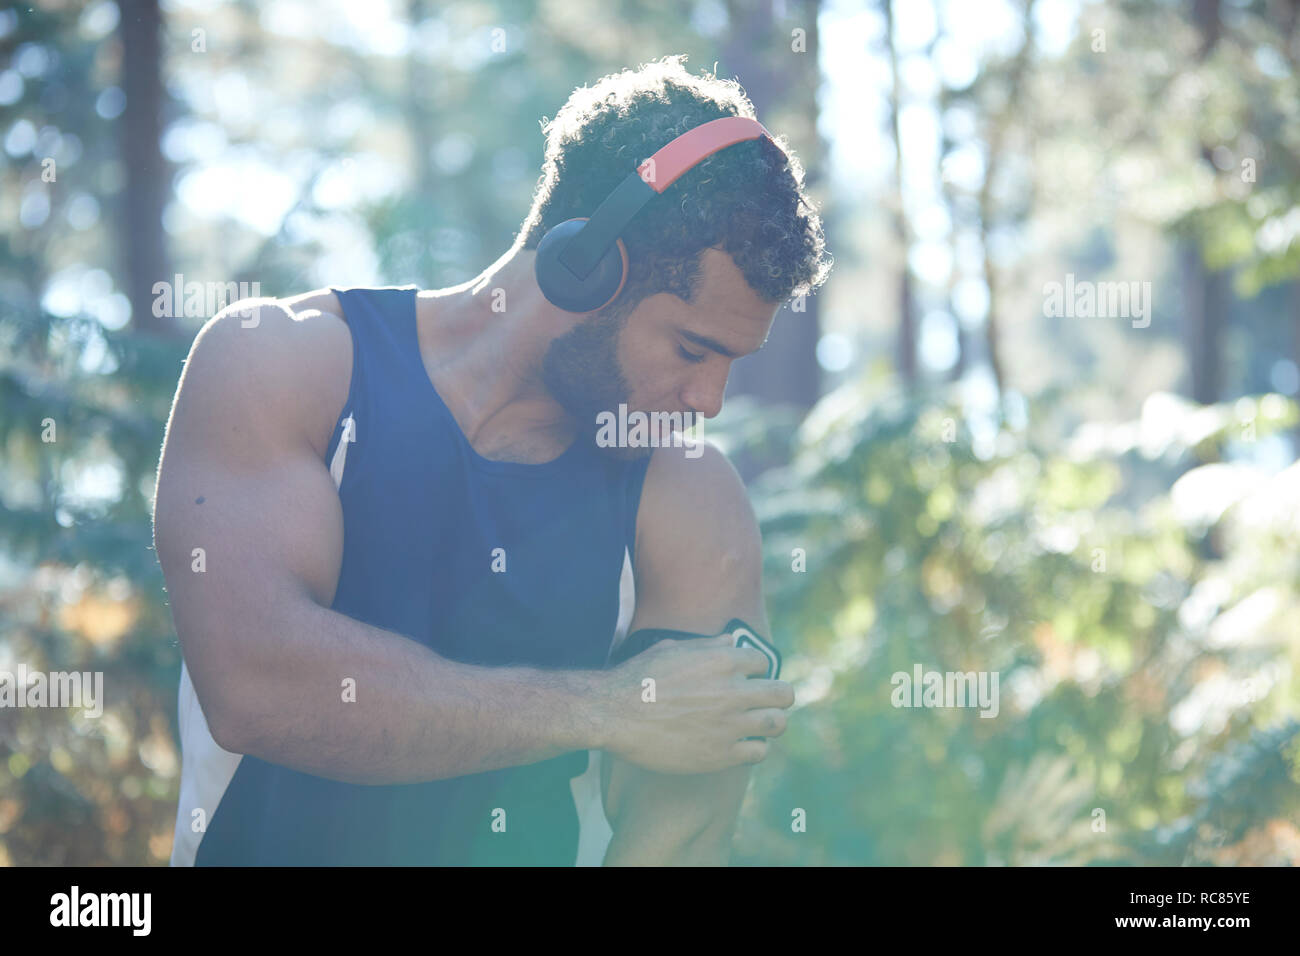 Male runner using smartphone armband in sunlit forest Stock Photo